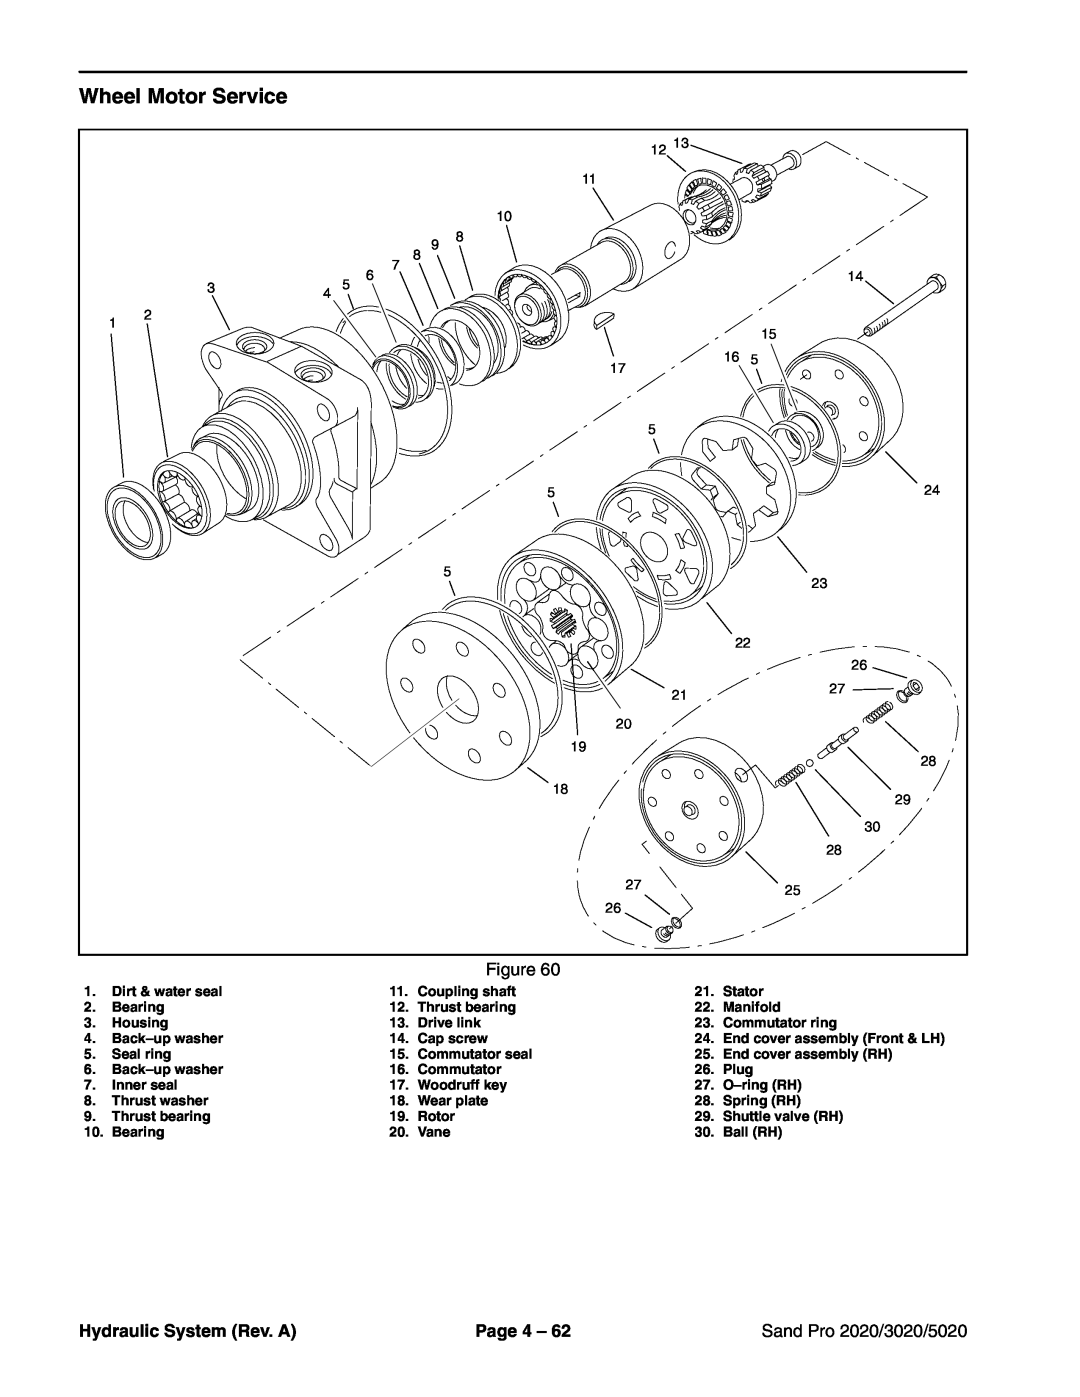 Toro Wheel Motor Service, Hydraulic System Rev. A, Page 4, Sand Pro 2020/3020/5020, End cover assembly Front & LH 